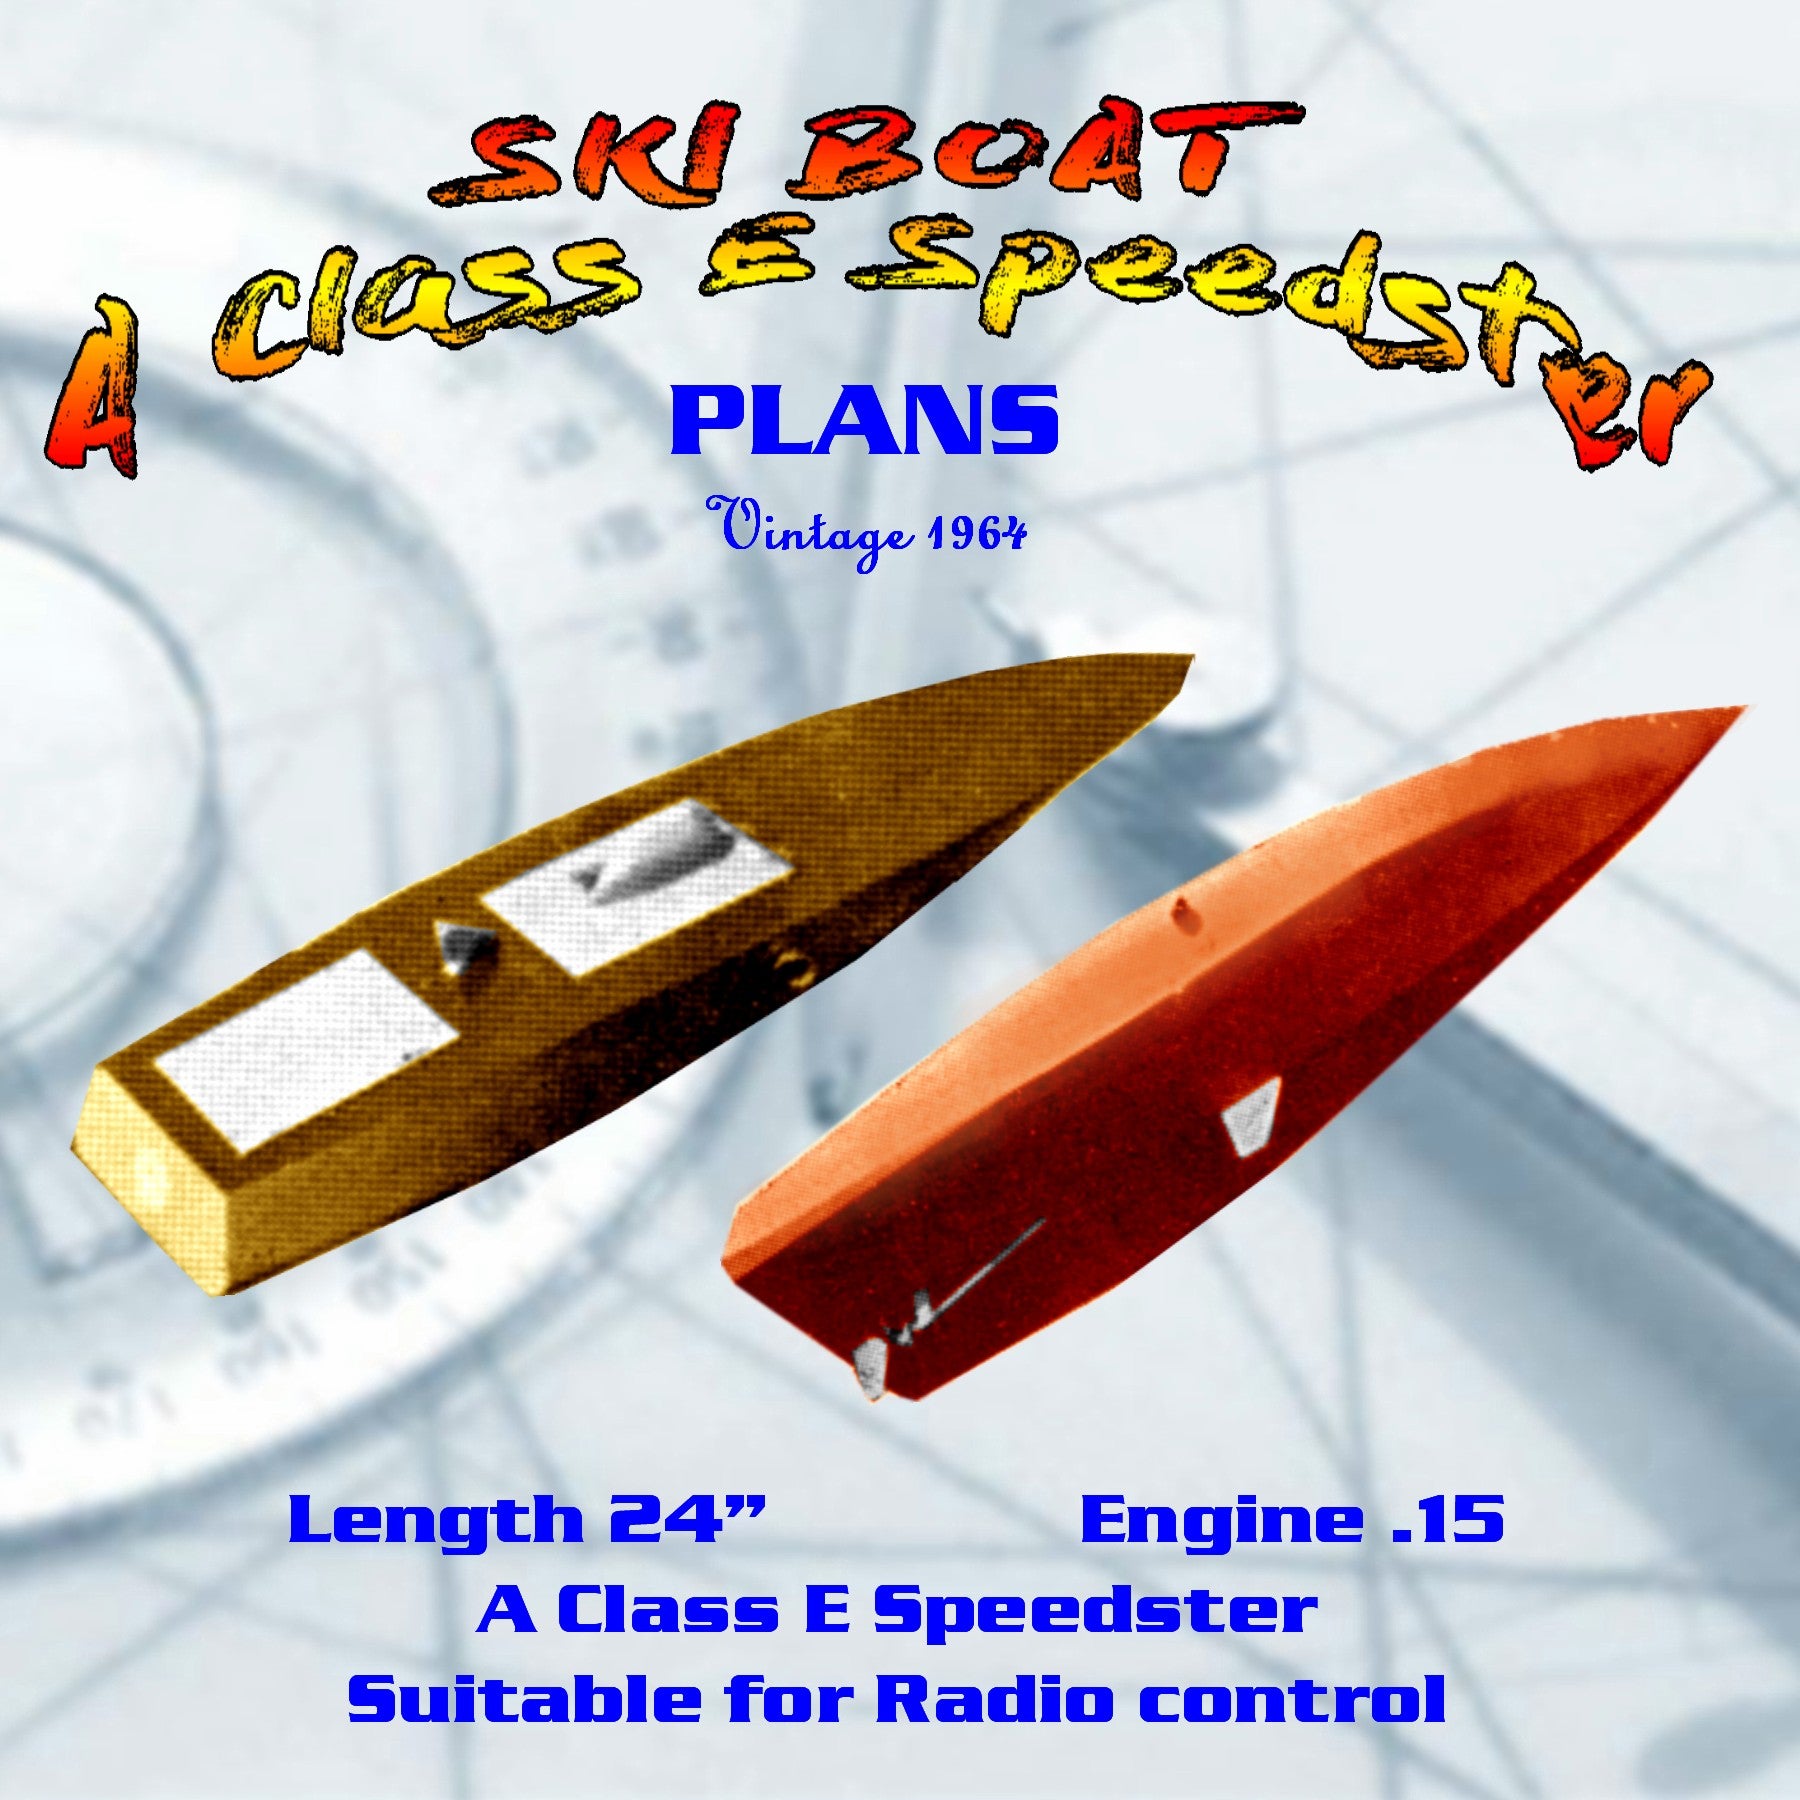 full size printed plan  class e speedster “ski boat” suitable for radio control